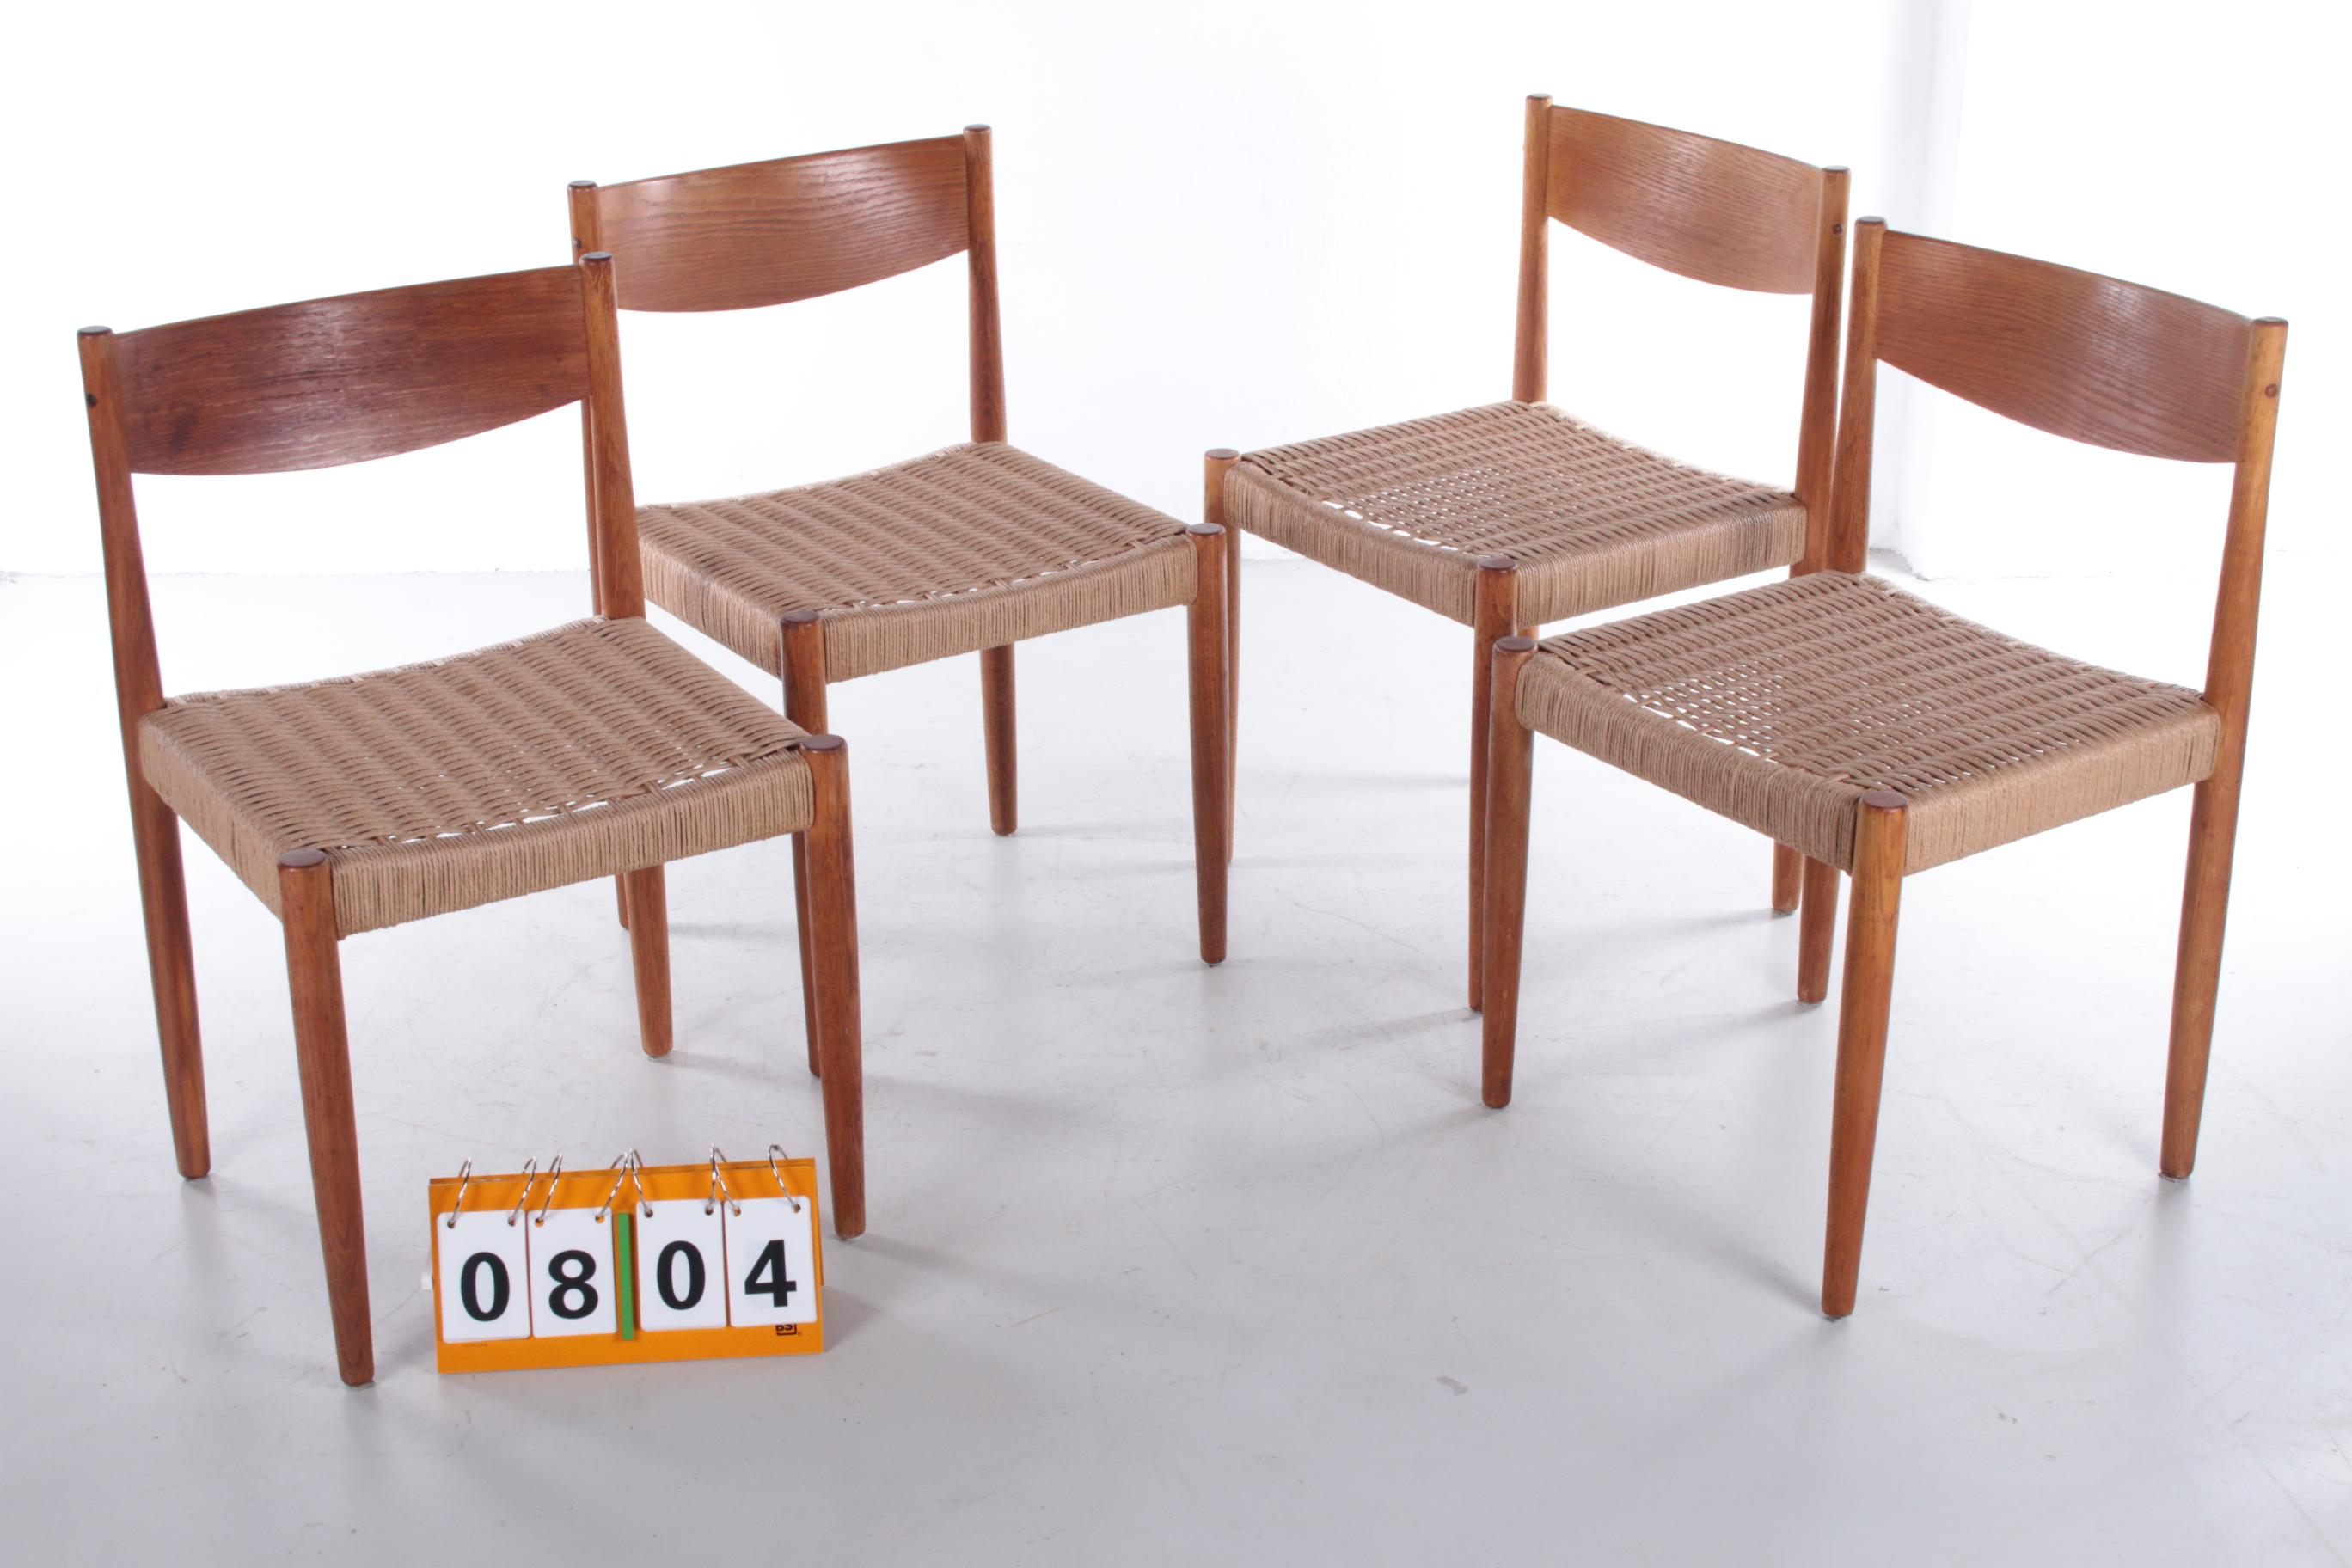 Danish Set of 4 Dining Room Chairs by Poul Volther for Frem Røjle, 1960s